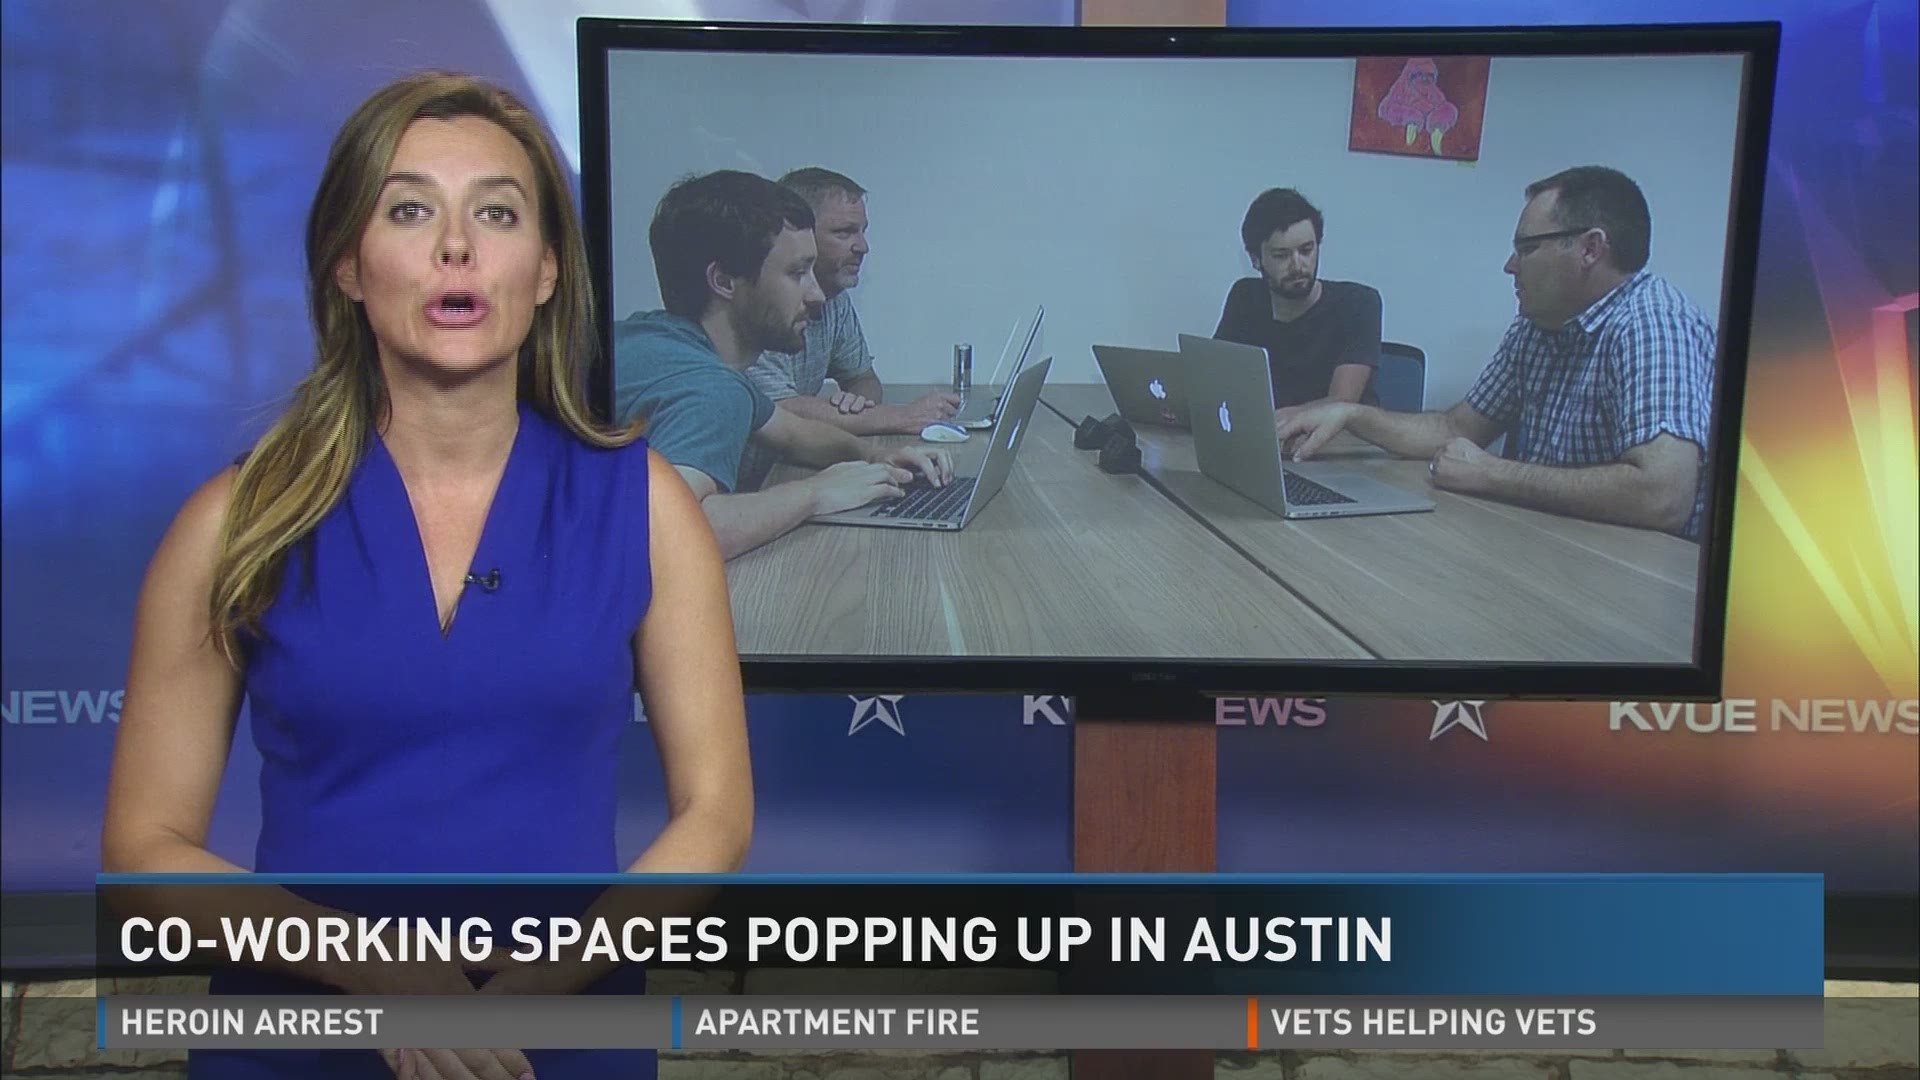 Co-working is a growing trend in Austin - and across our city were seeing several of these so-called shared workspaces popping up.